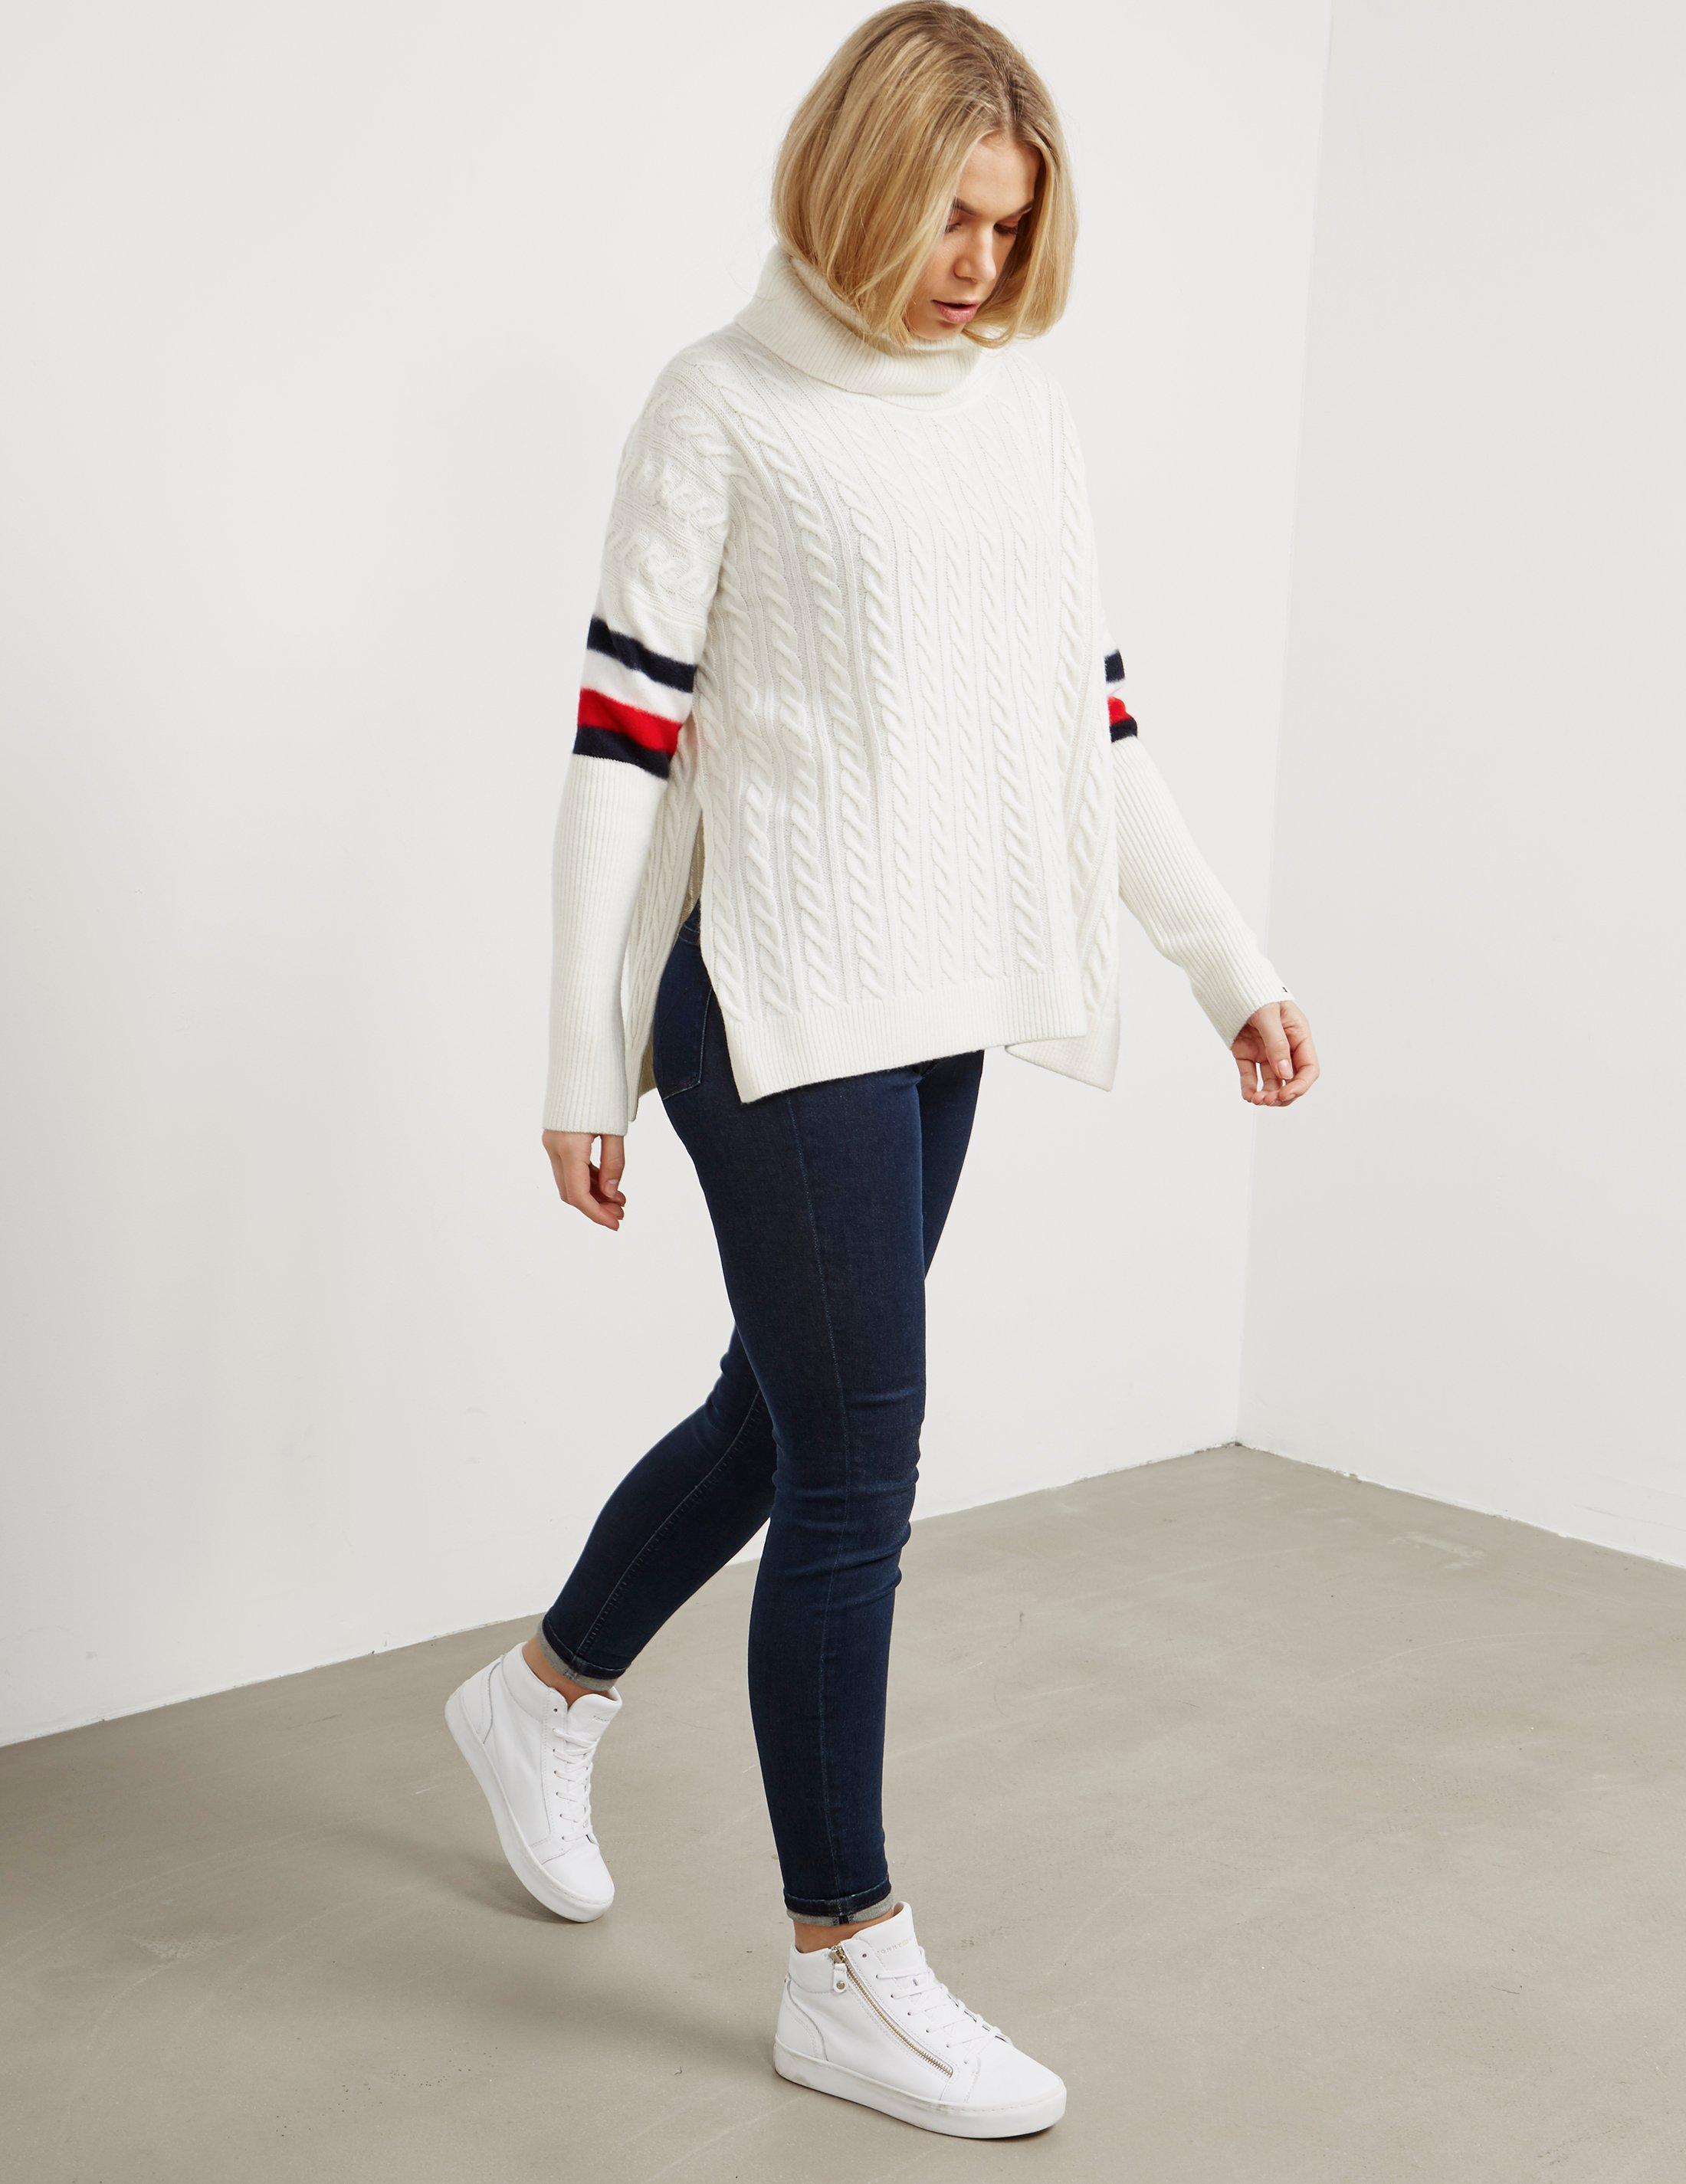 Tommy Hilfiger White Jumper Womens Outlet, SAVE 57%.